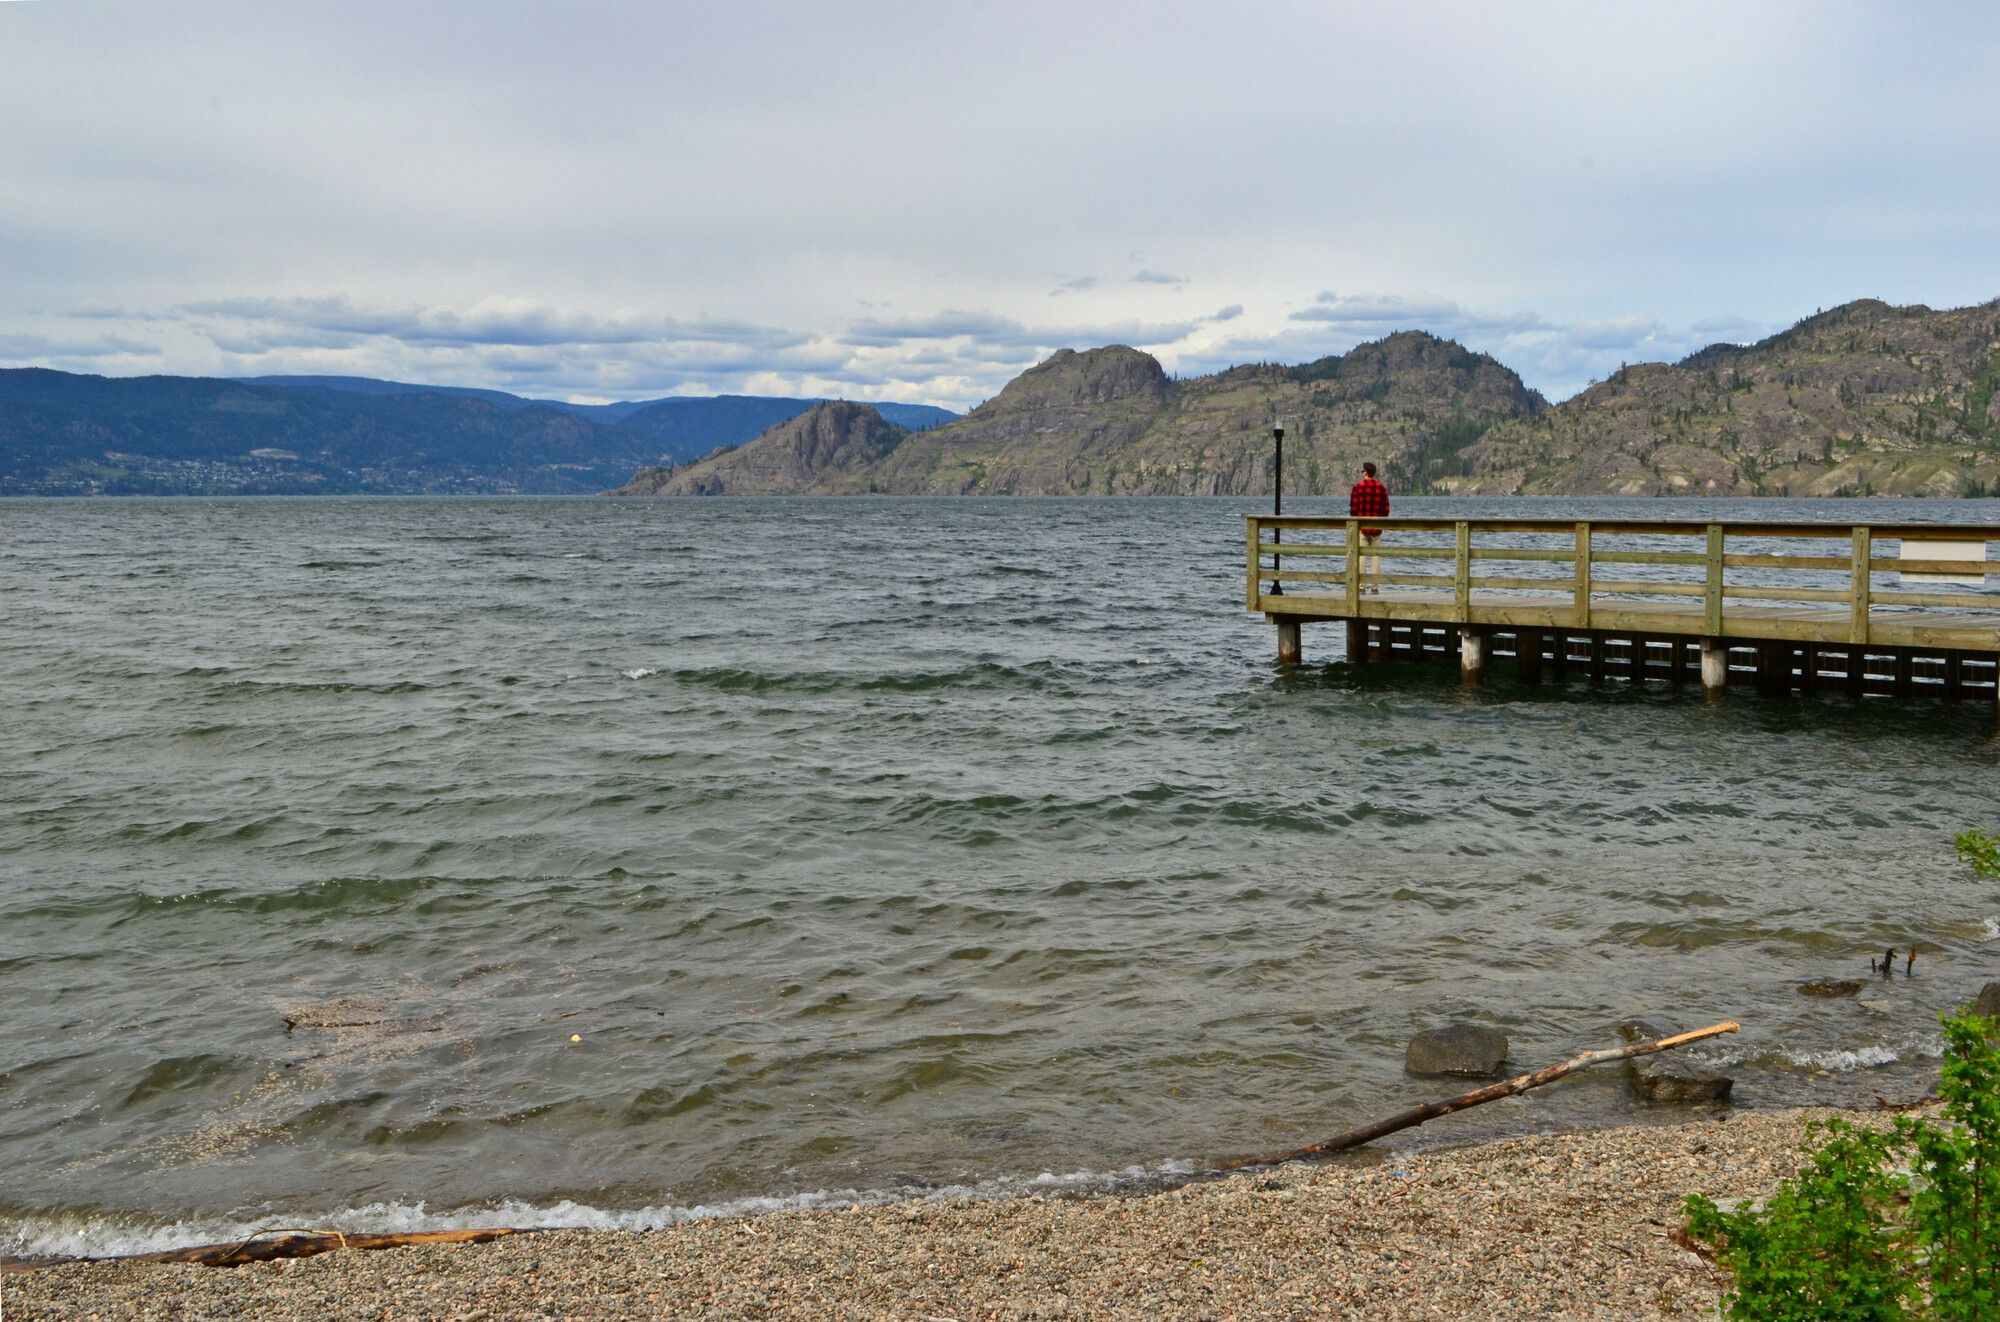 Looking out at Okanagan Lake on a windy day.